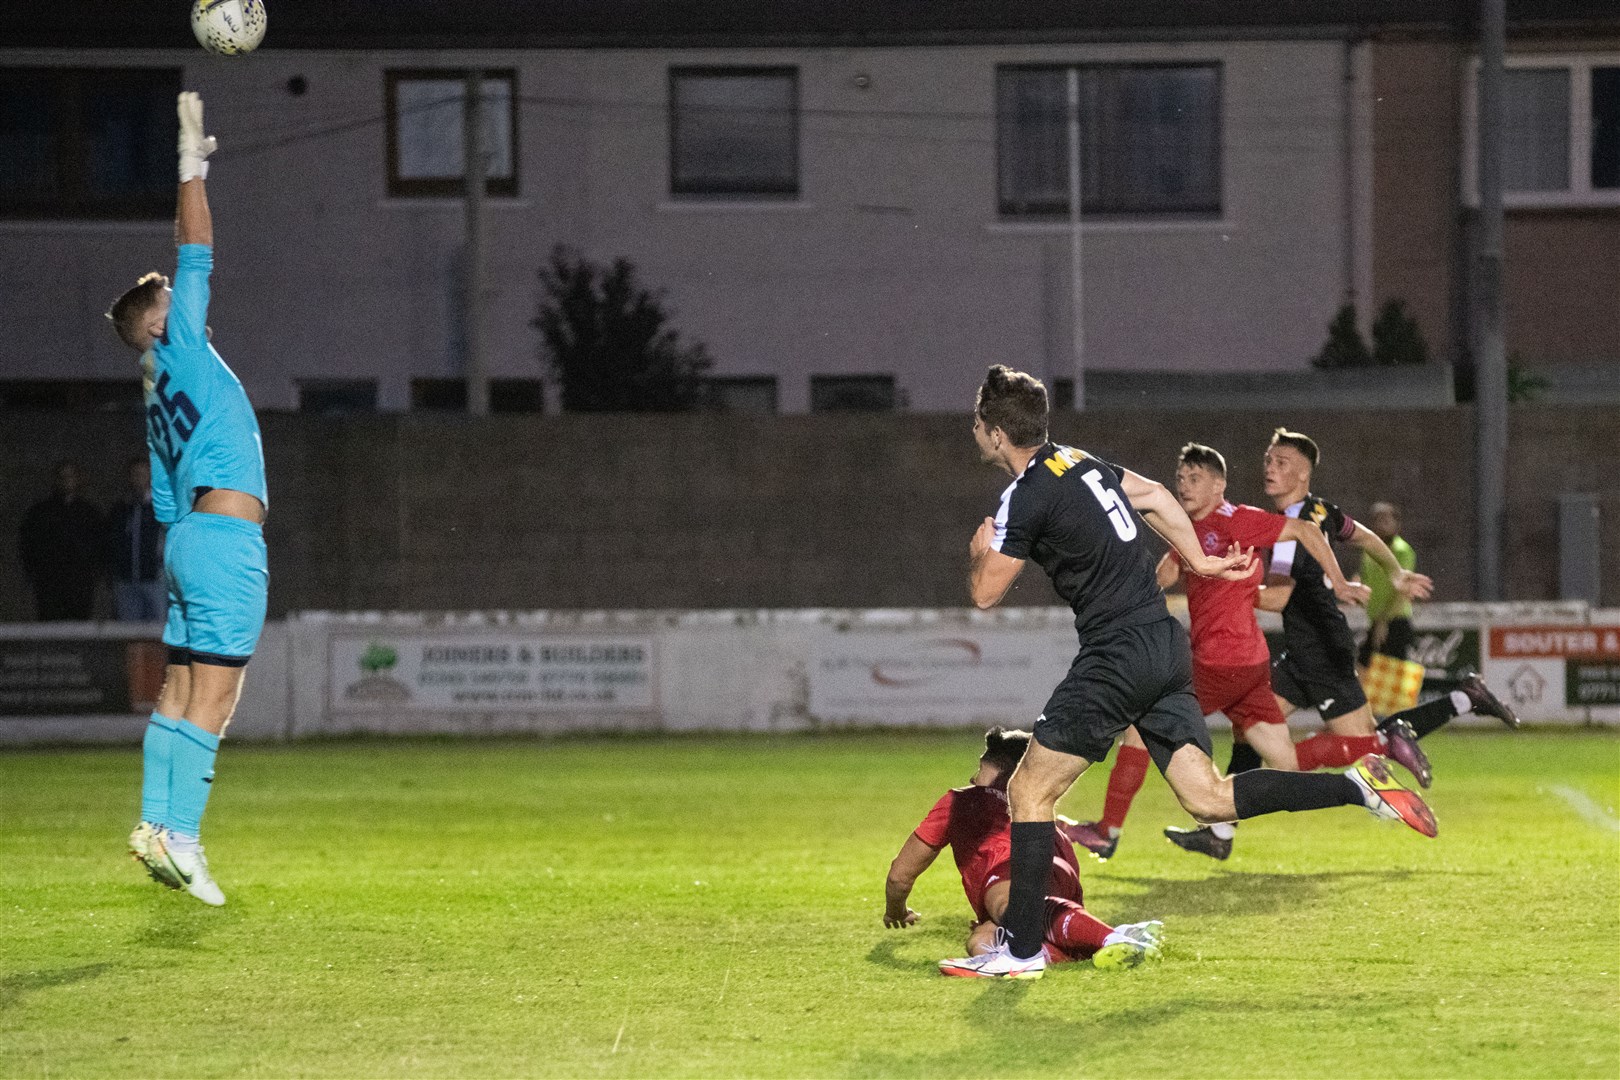 Strathspey #5 Stephen Kelly flicks the ball over Lossie's Ross Elliott and his own keeper towards goal for the home side's third...Lossiemouth FC (4) vs Strathspey Thistle (2) - Highland Football League 22/23 - Grant Park, Lossiemouth 24/08/2022...Picture: Daniel Forsyth..